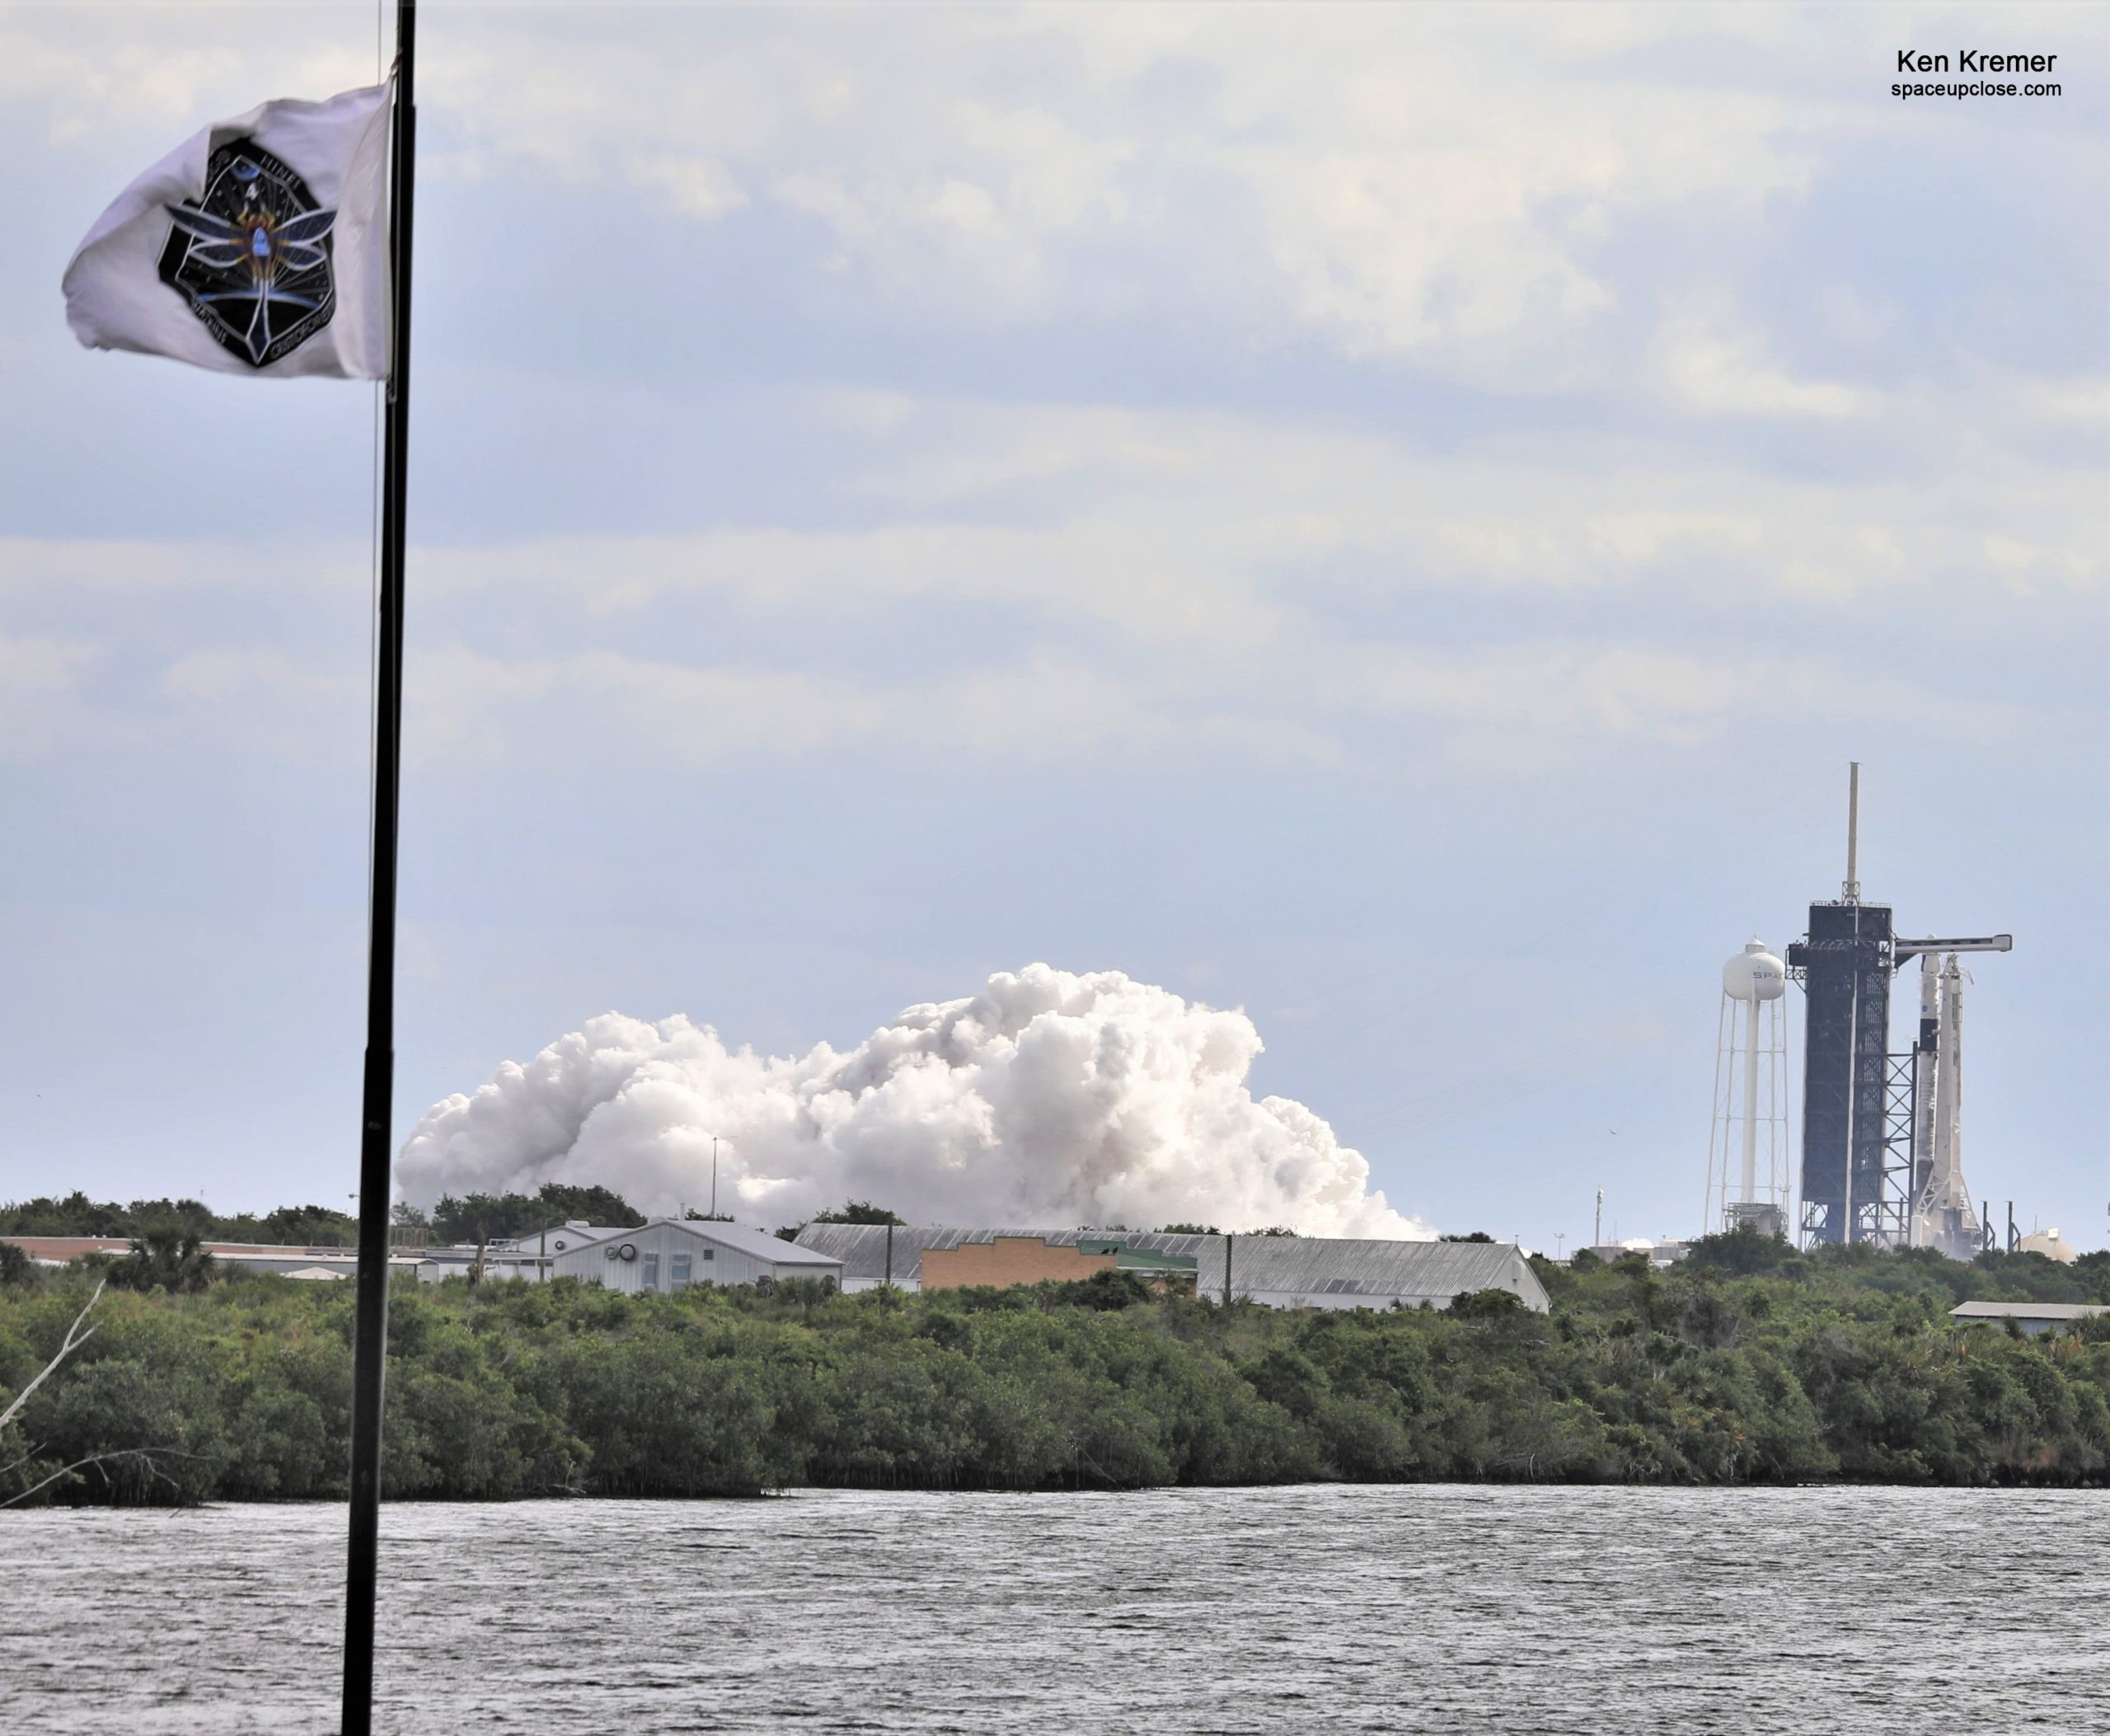 SpaceX Completes Static Fire Test for NASA Crew 4 Launch But Weather Delays Axiom-1 ISS Departure: Photos